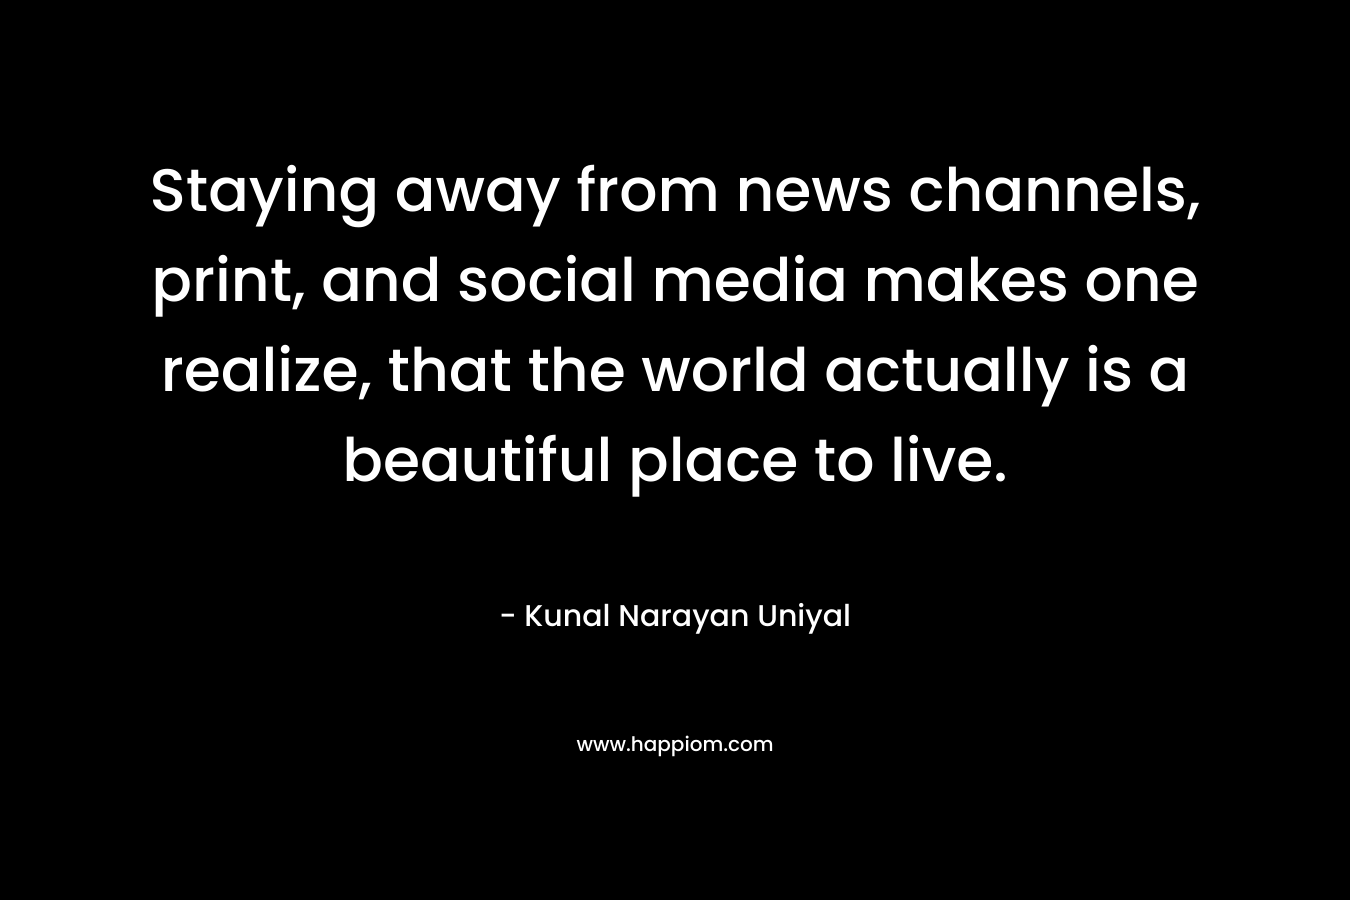 Staying away from news channels, print, and social media makes one realize, that the world actually is a beautiful place to live.